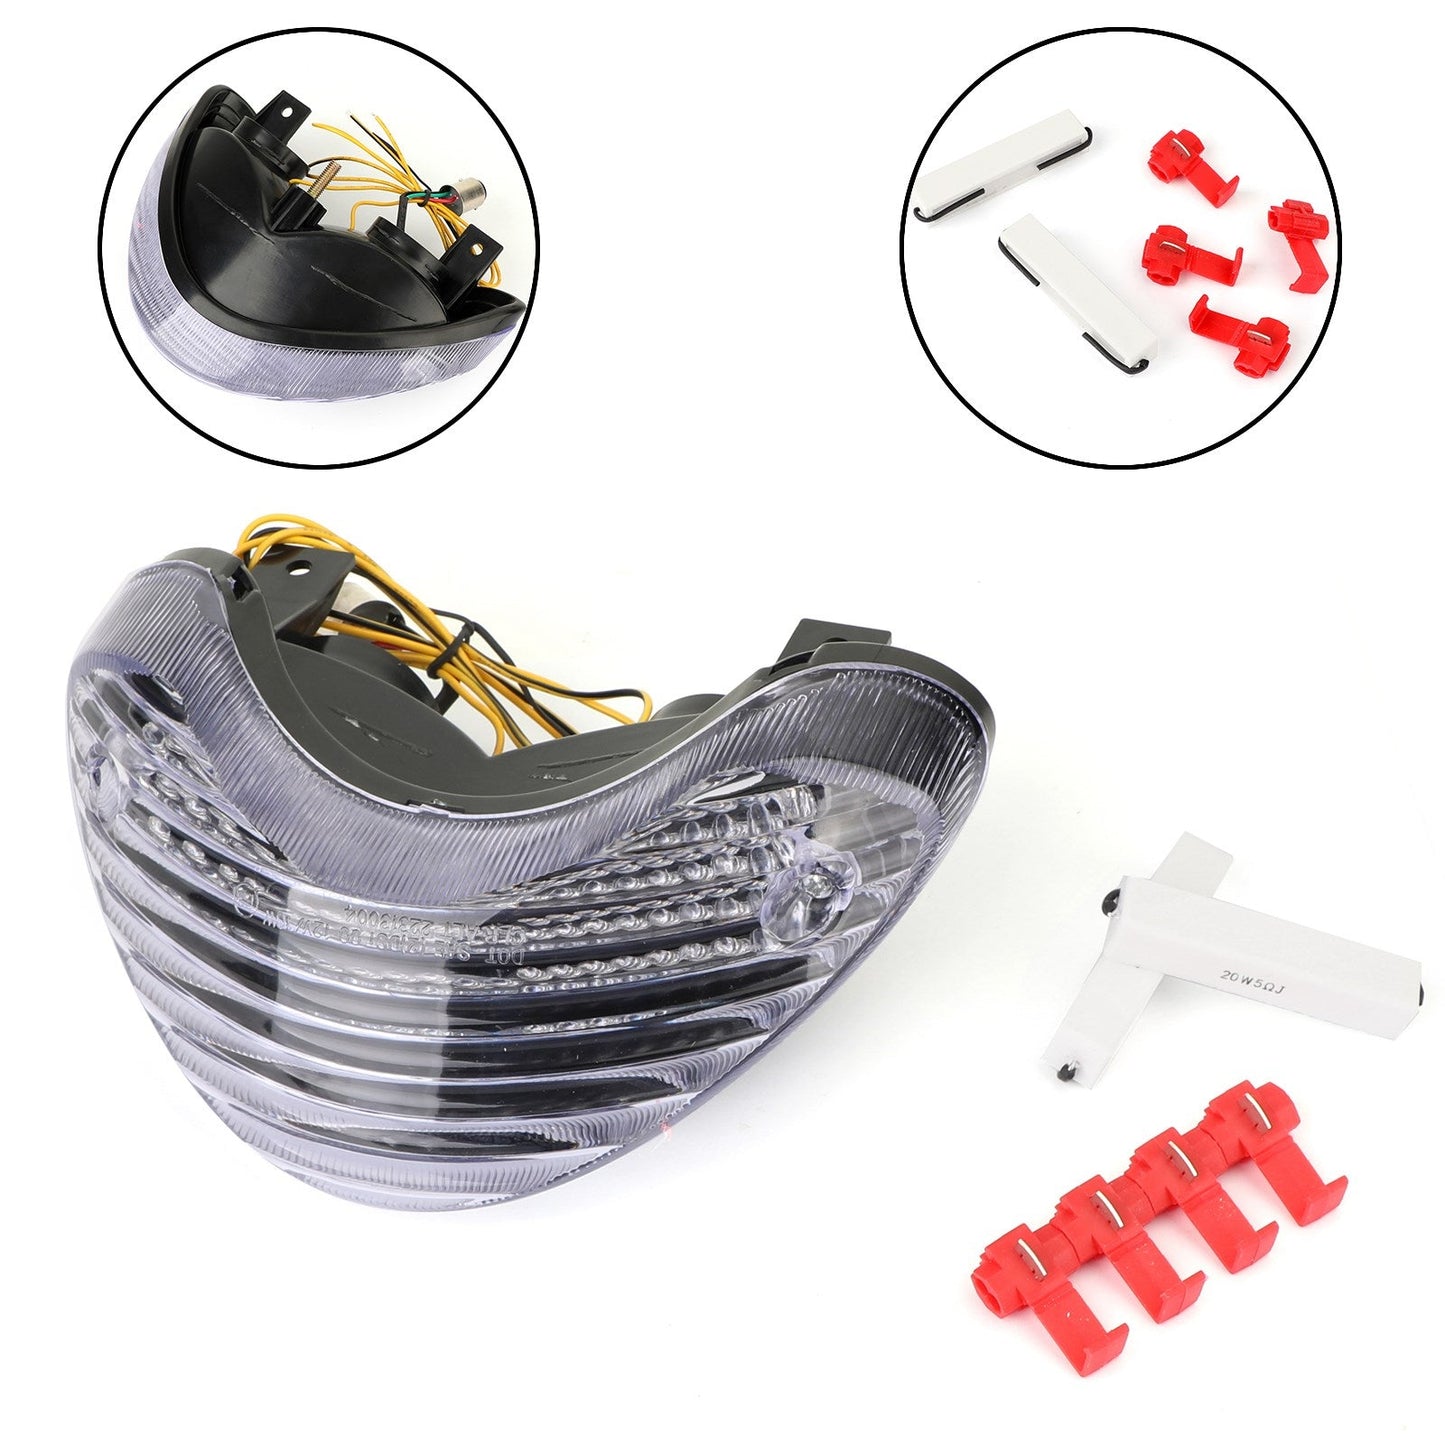 Clear LED Taillight integrated Turn Signals for Suzuki SV650 TL1000S TL1000R